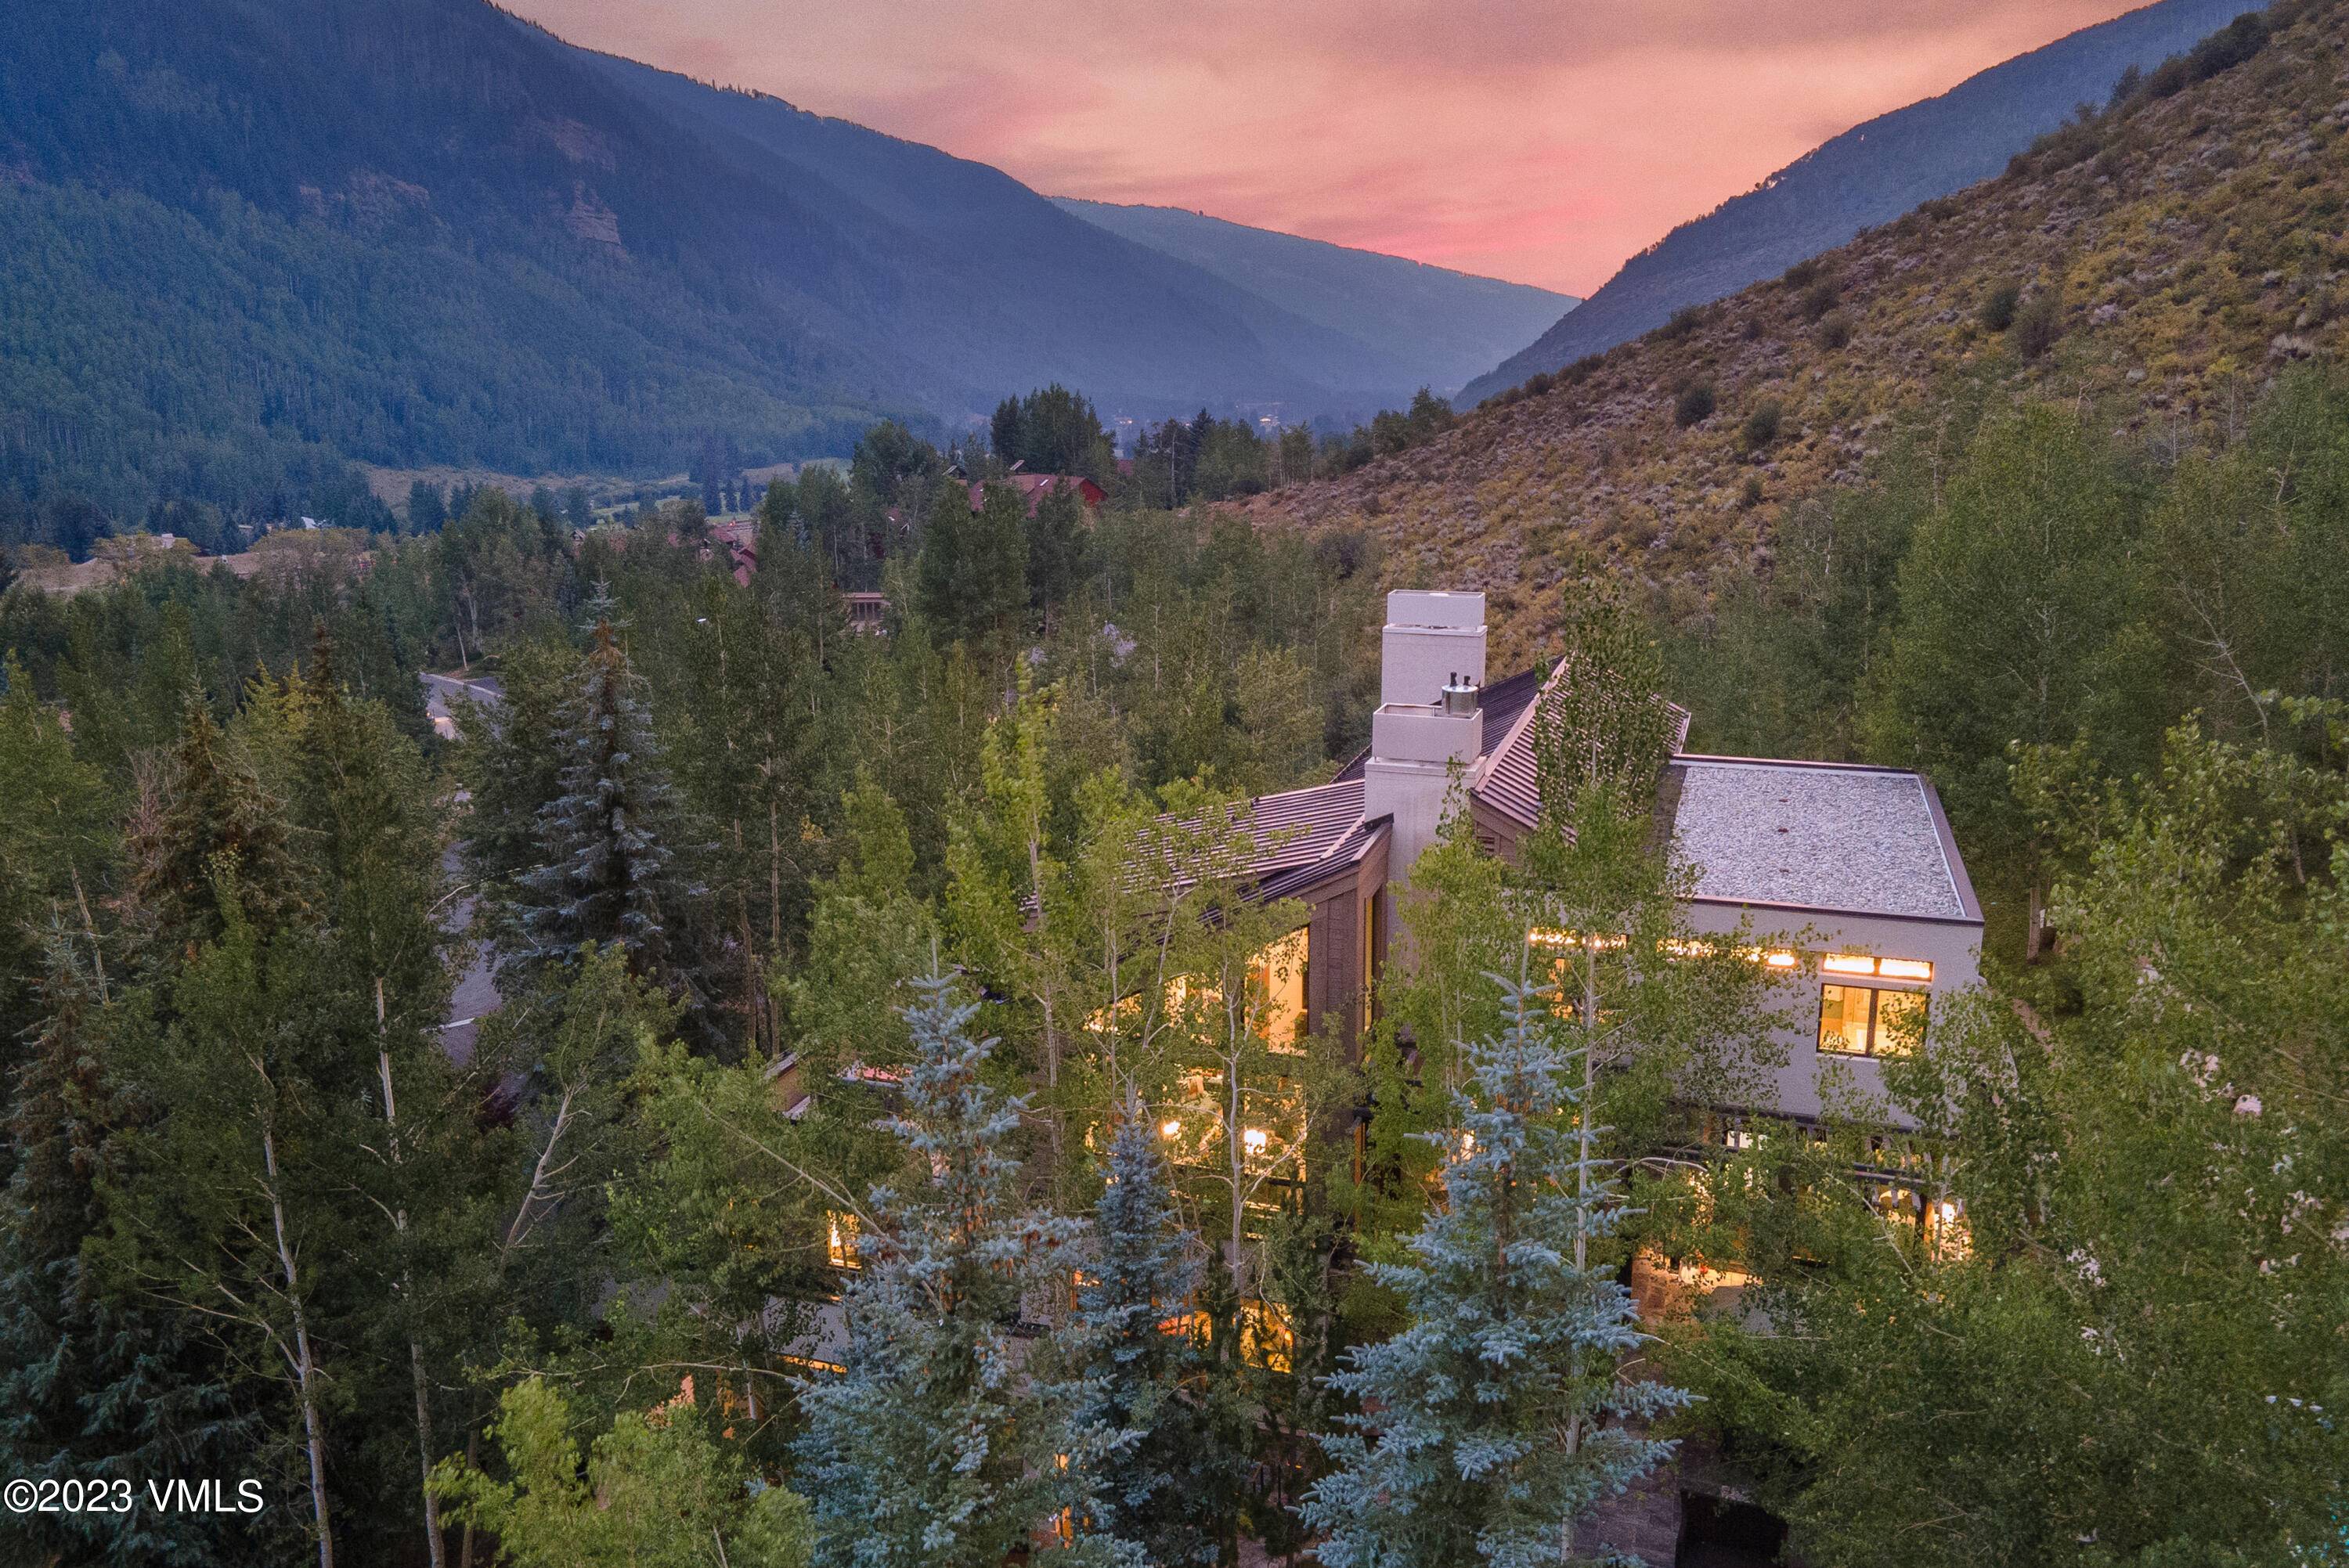 Tucked away in Vail's alpine landscape, an entertainer's mountain dream home offers a warm, stylish welcome.